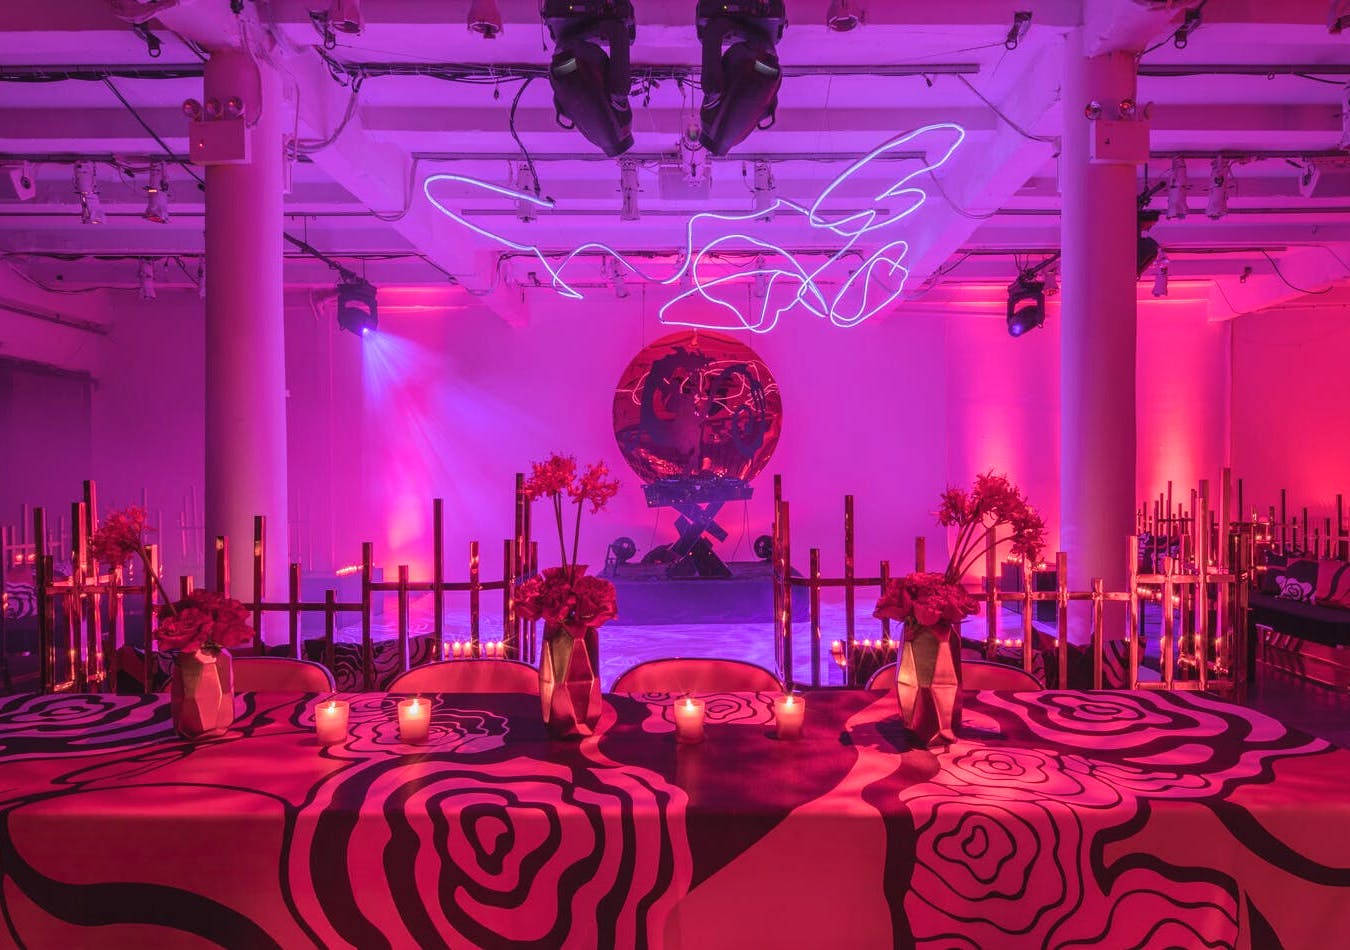 Industrial wedding with rose linen, abstract neon lighting, and purple uplighting | PartySlate